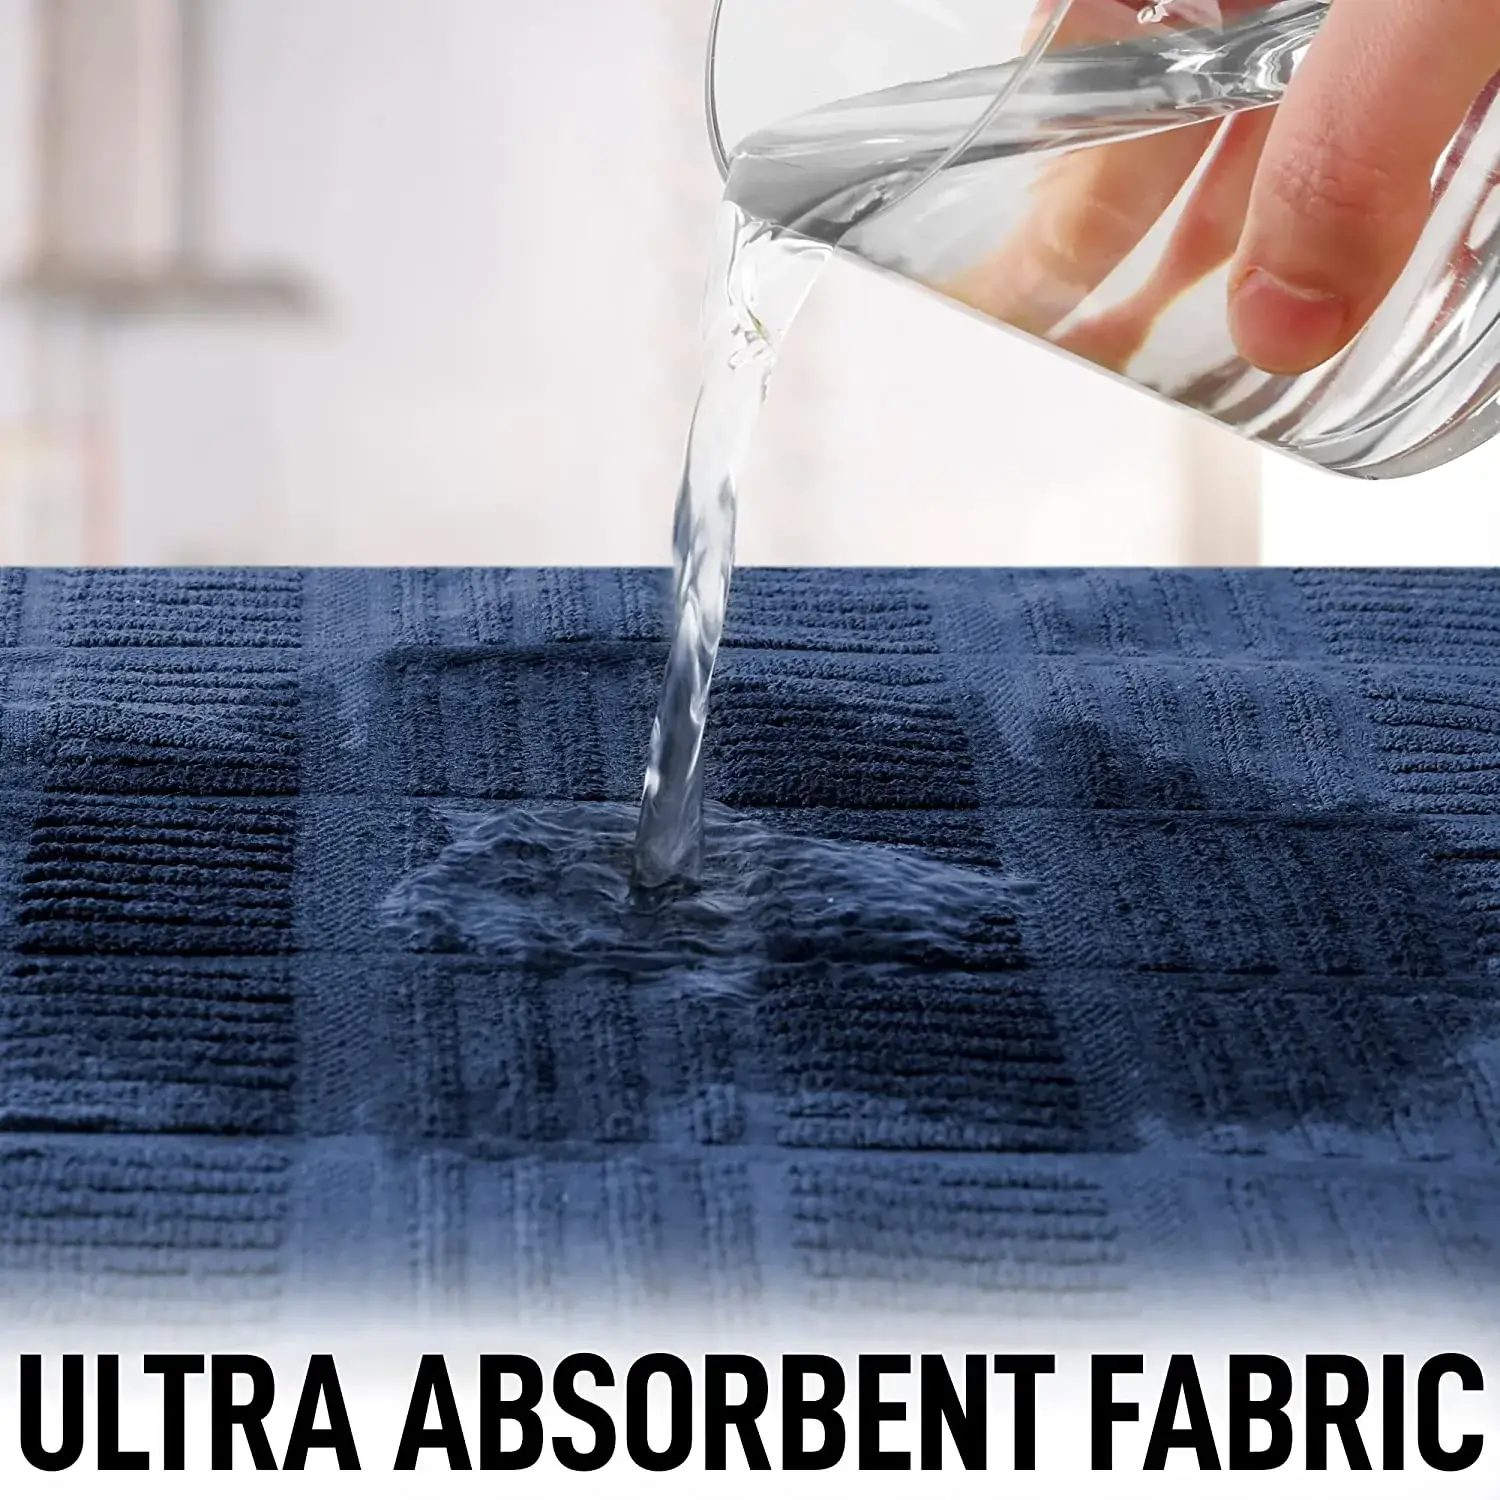 Absorbent Kitchen Towels Cotton